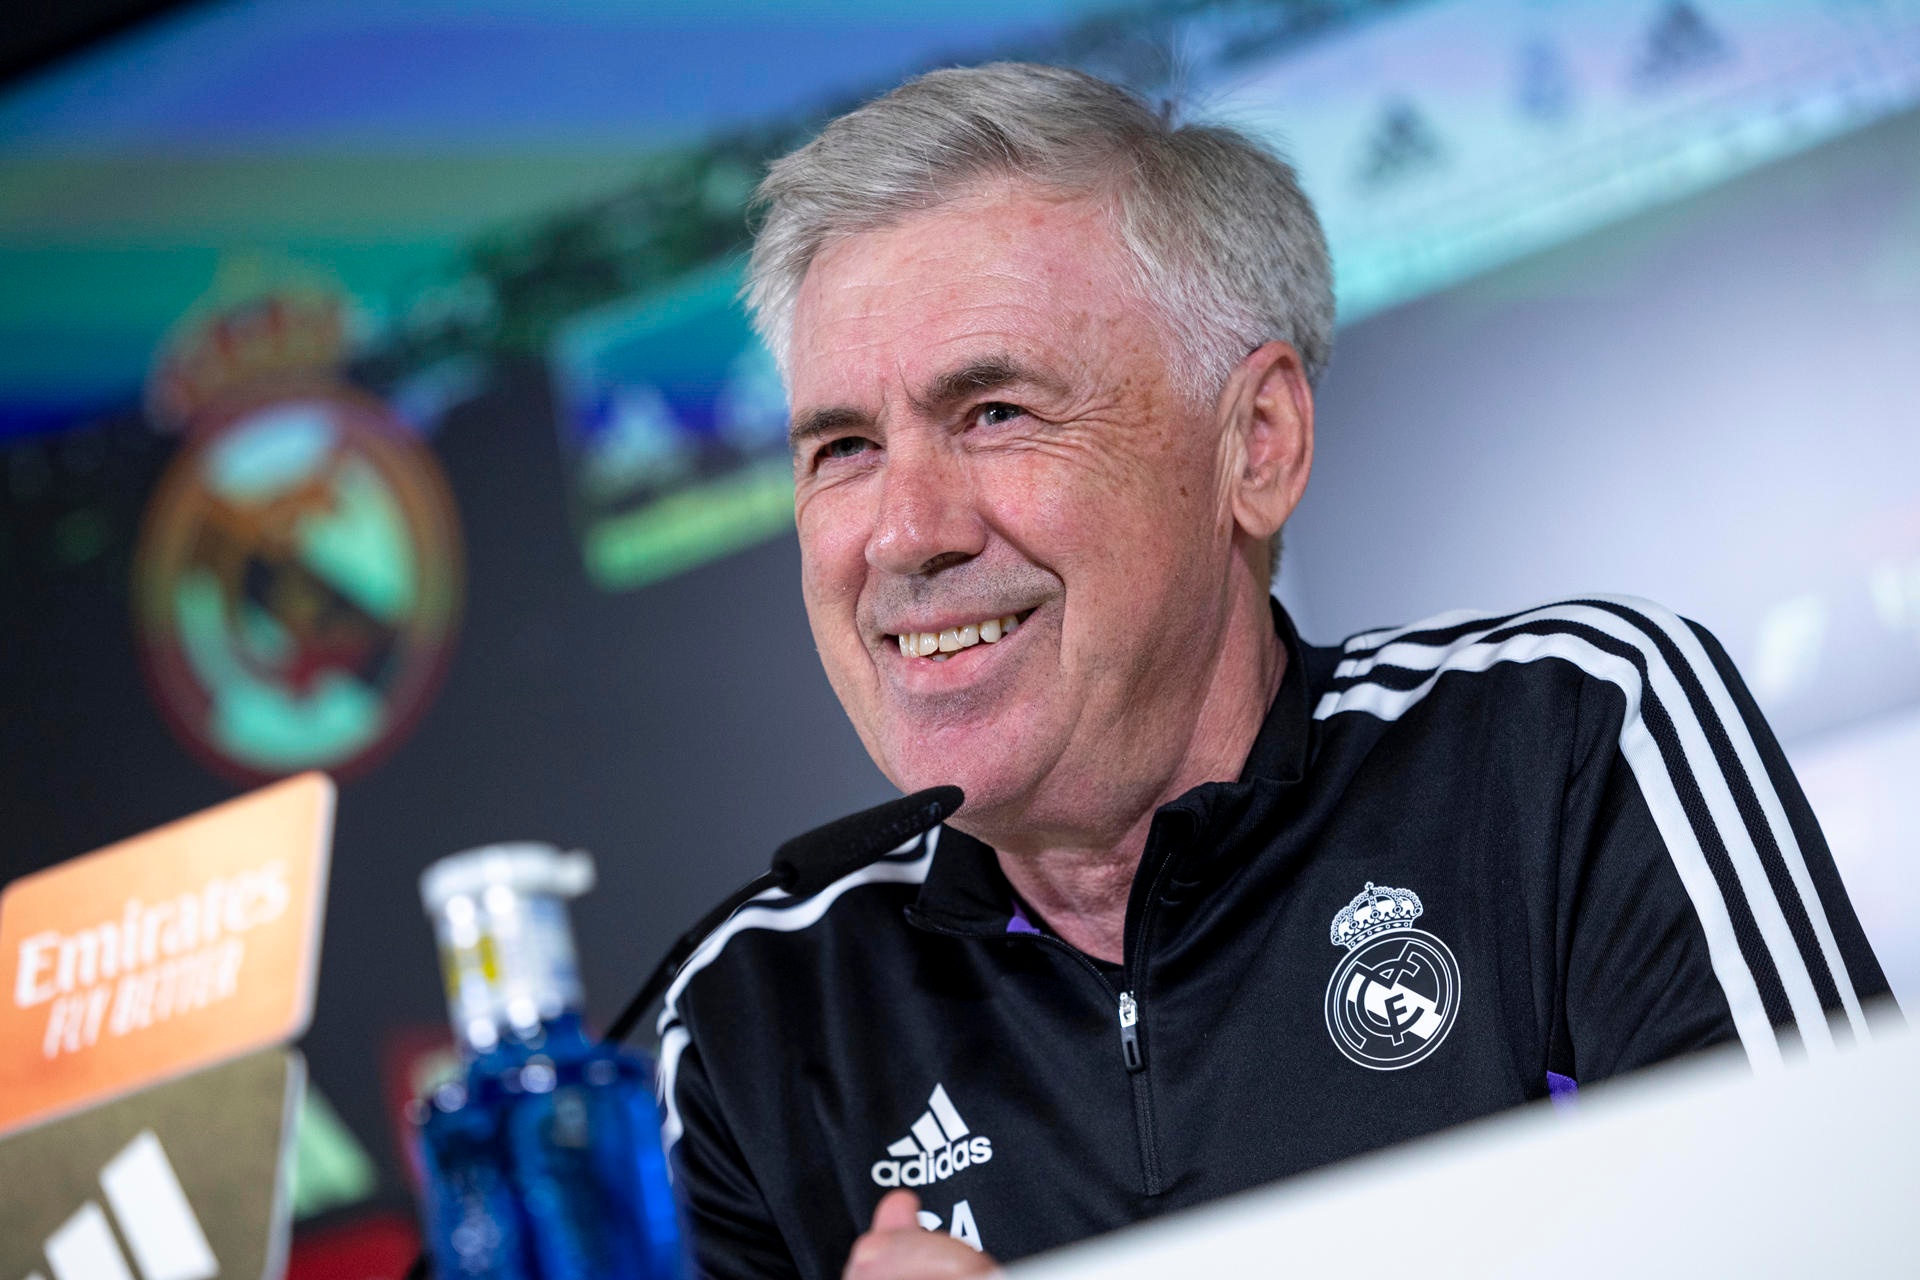 Brazil have been eyeing Carlo Ancelotti to become head coach. EFE